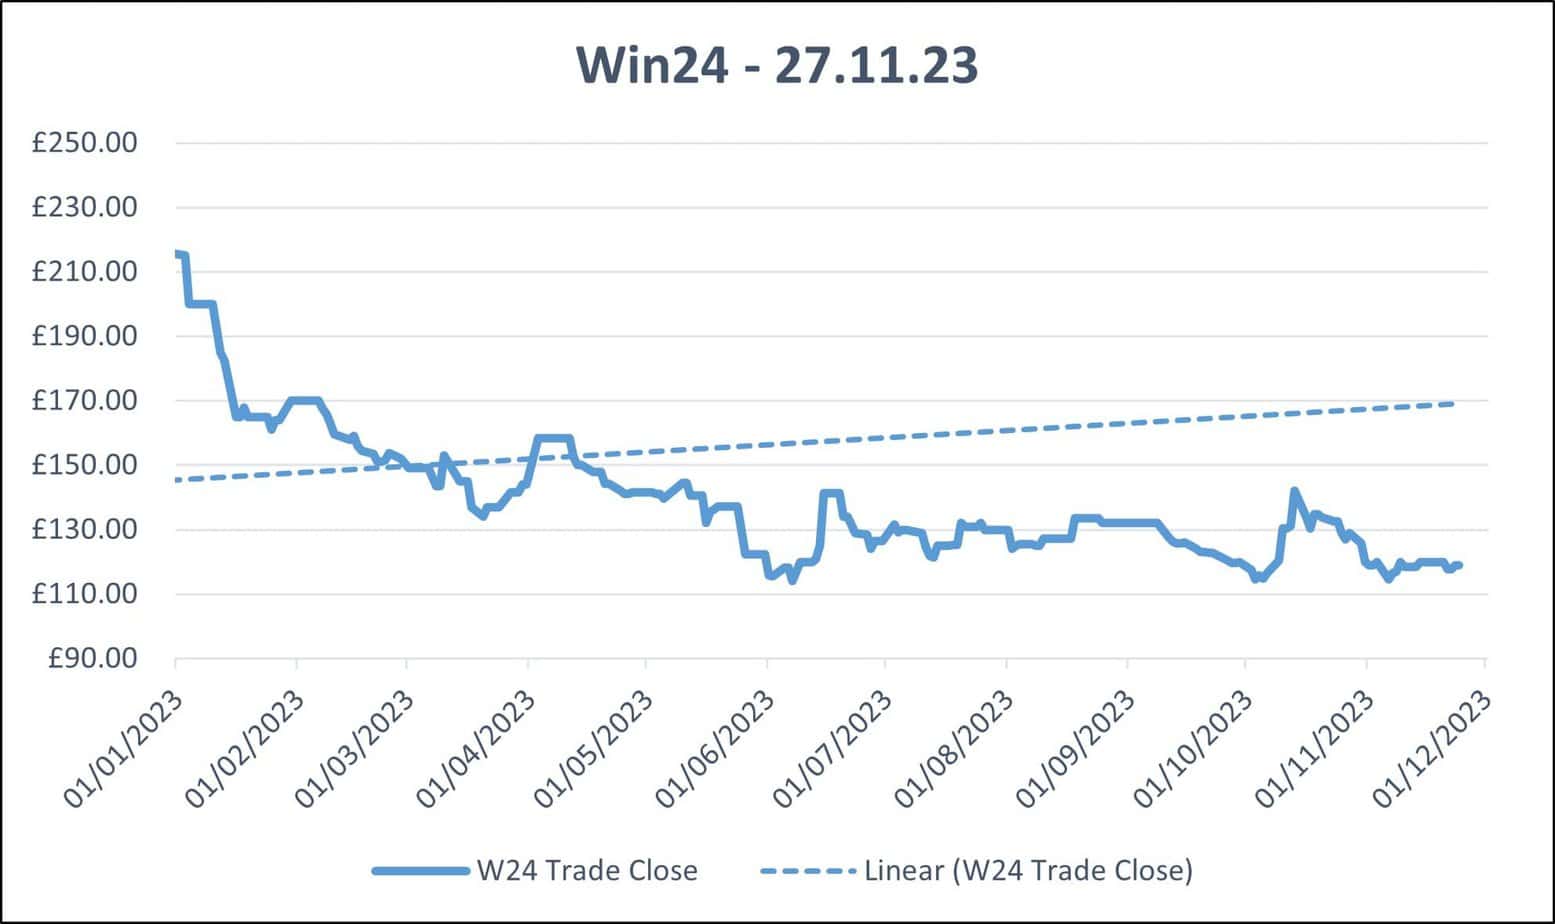 Wim24 wholesale electricity price chart 27.11.23